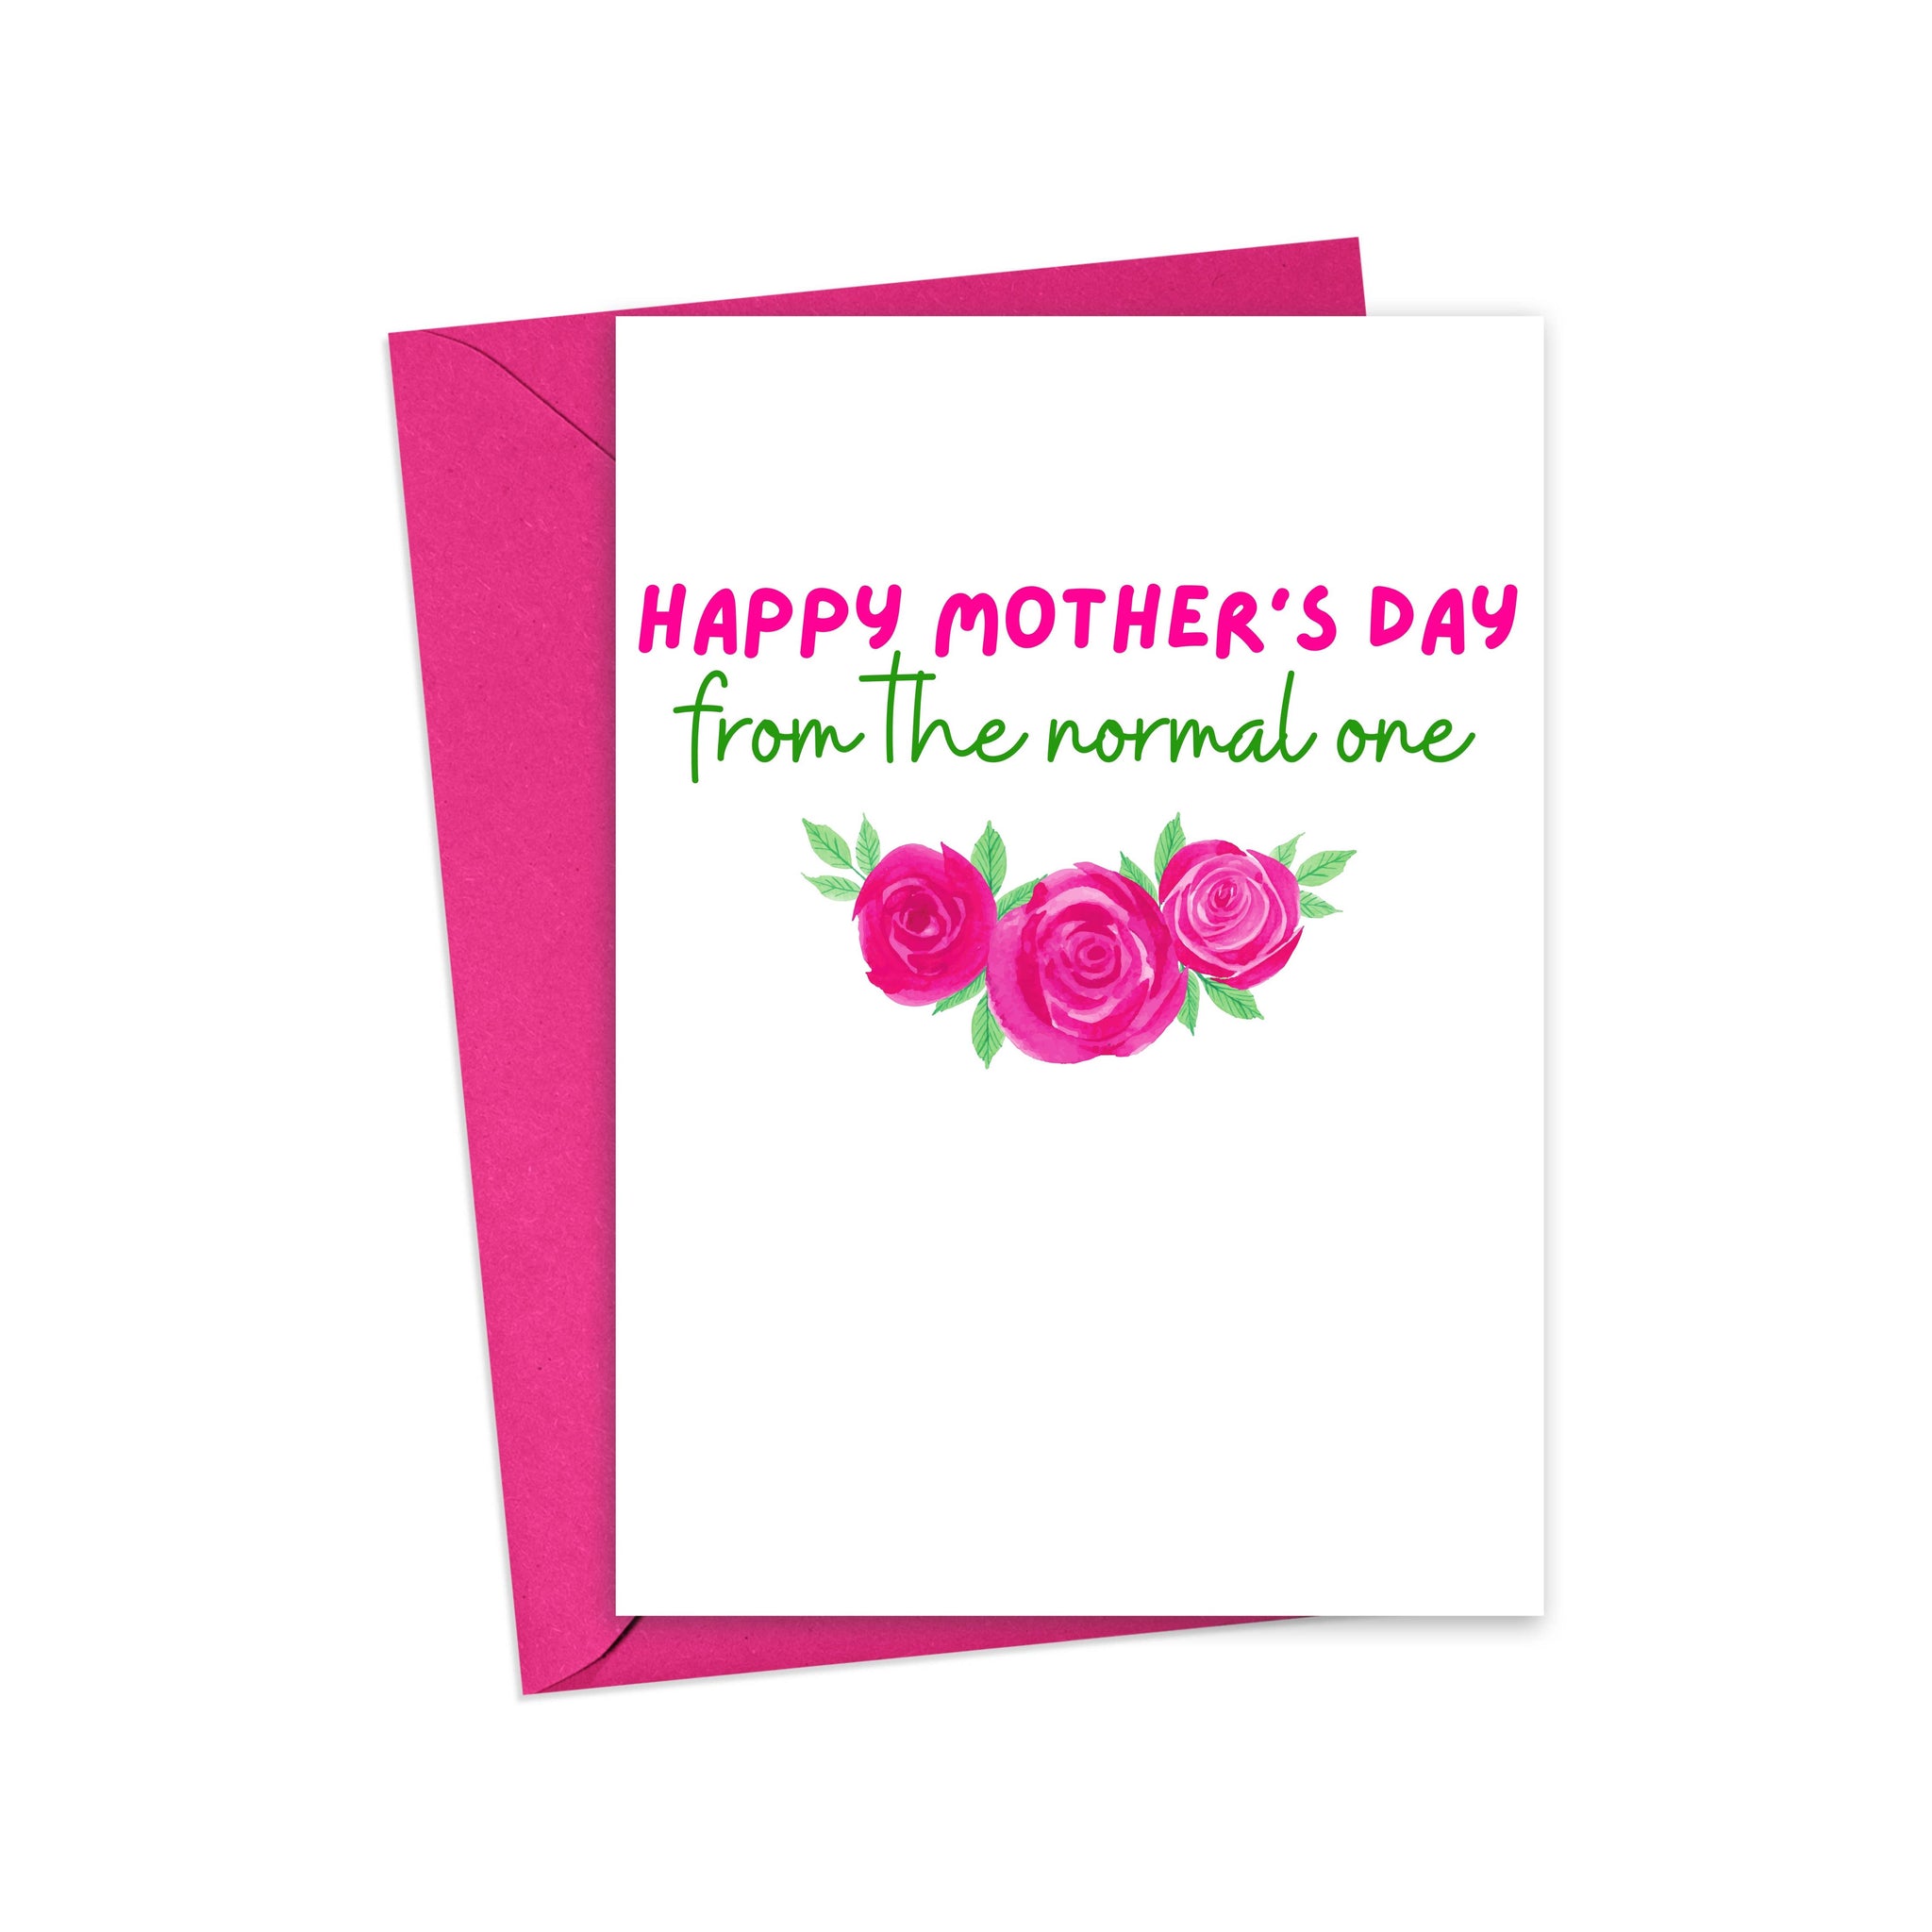 Funny Mothers Day Card - Happy Mother's Day Card for Mom